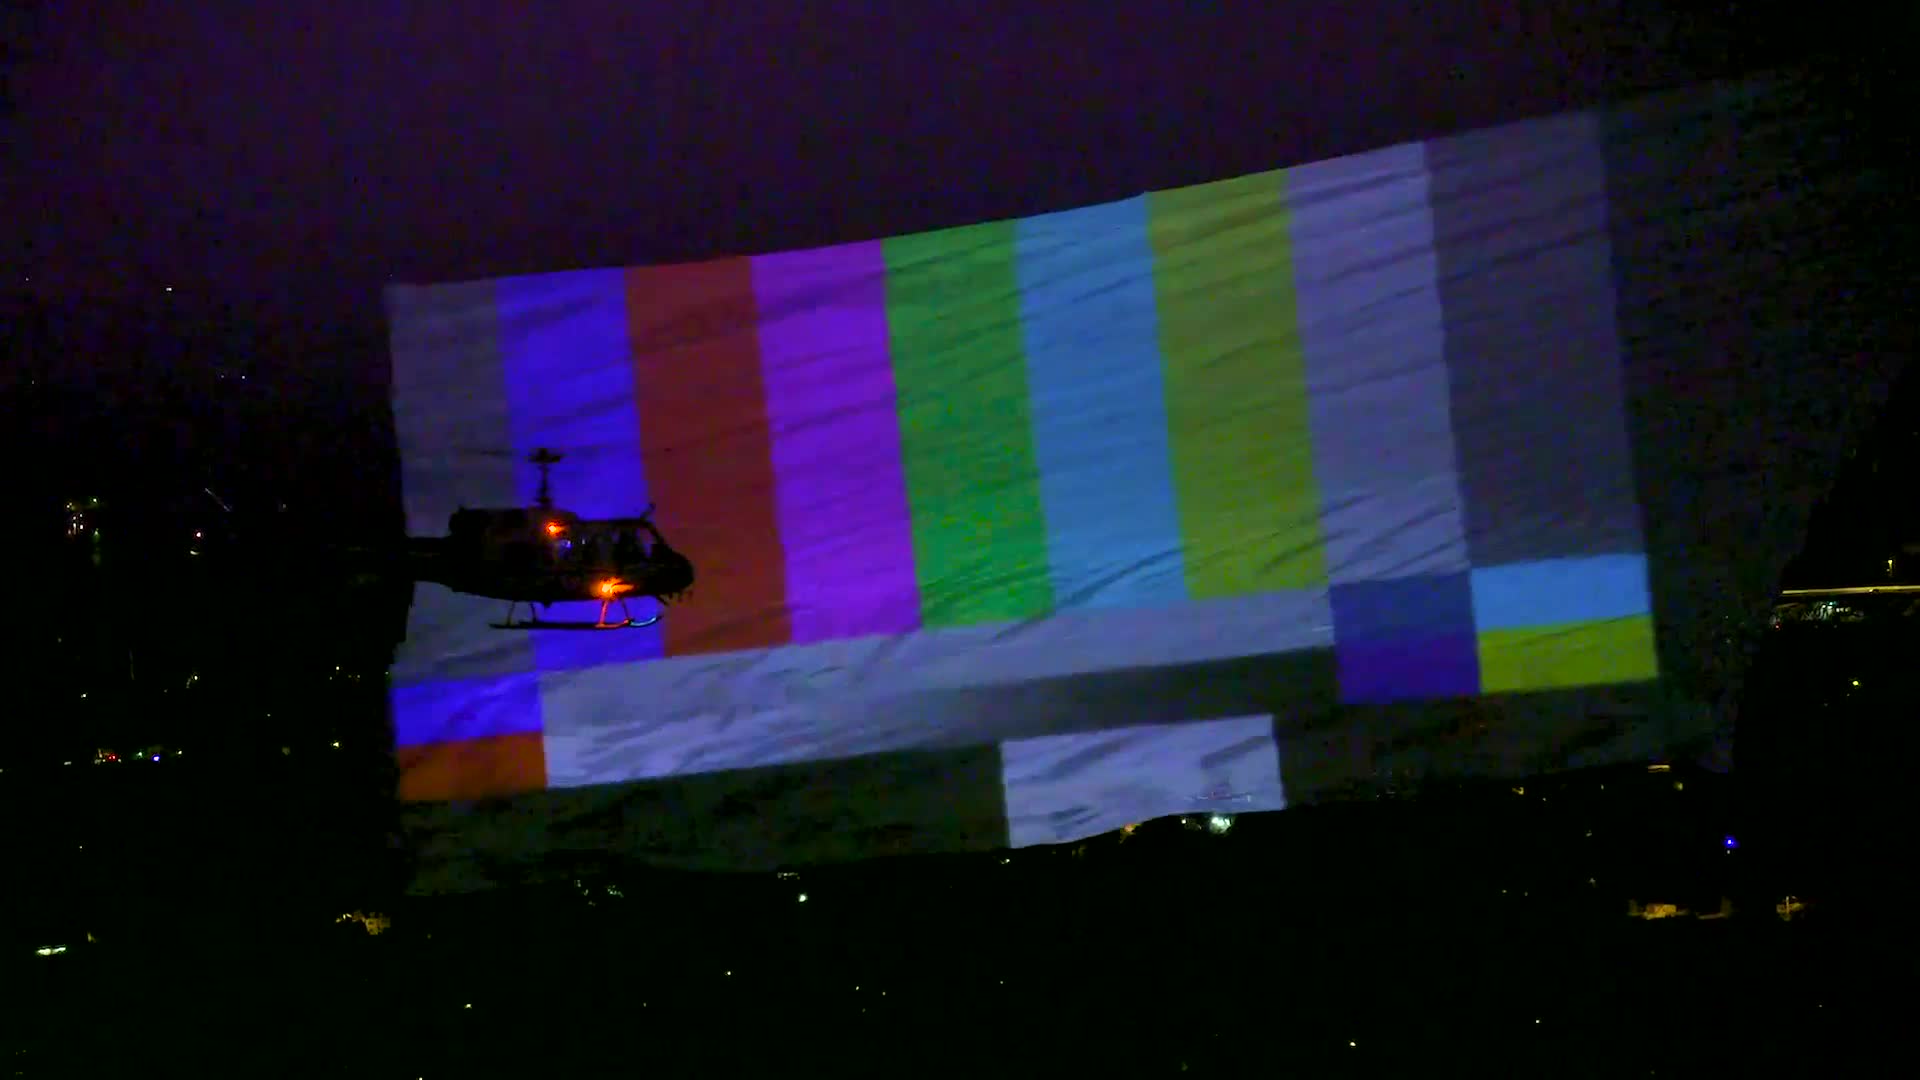 The VMA’s Used Helicopters to Break the Record For Largest Aerial Projection Screen